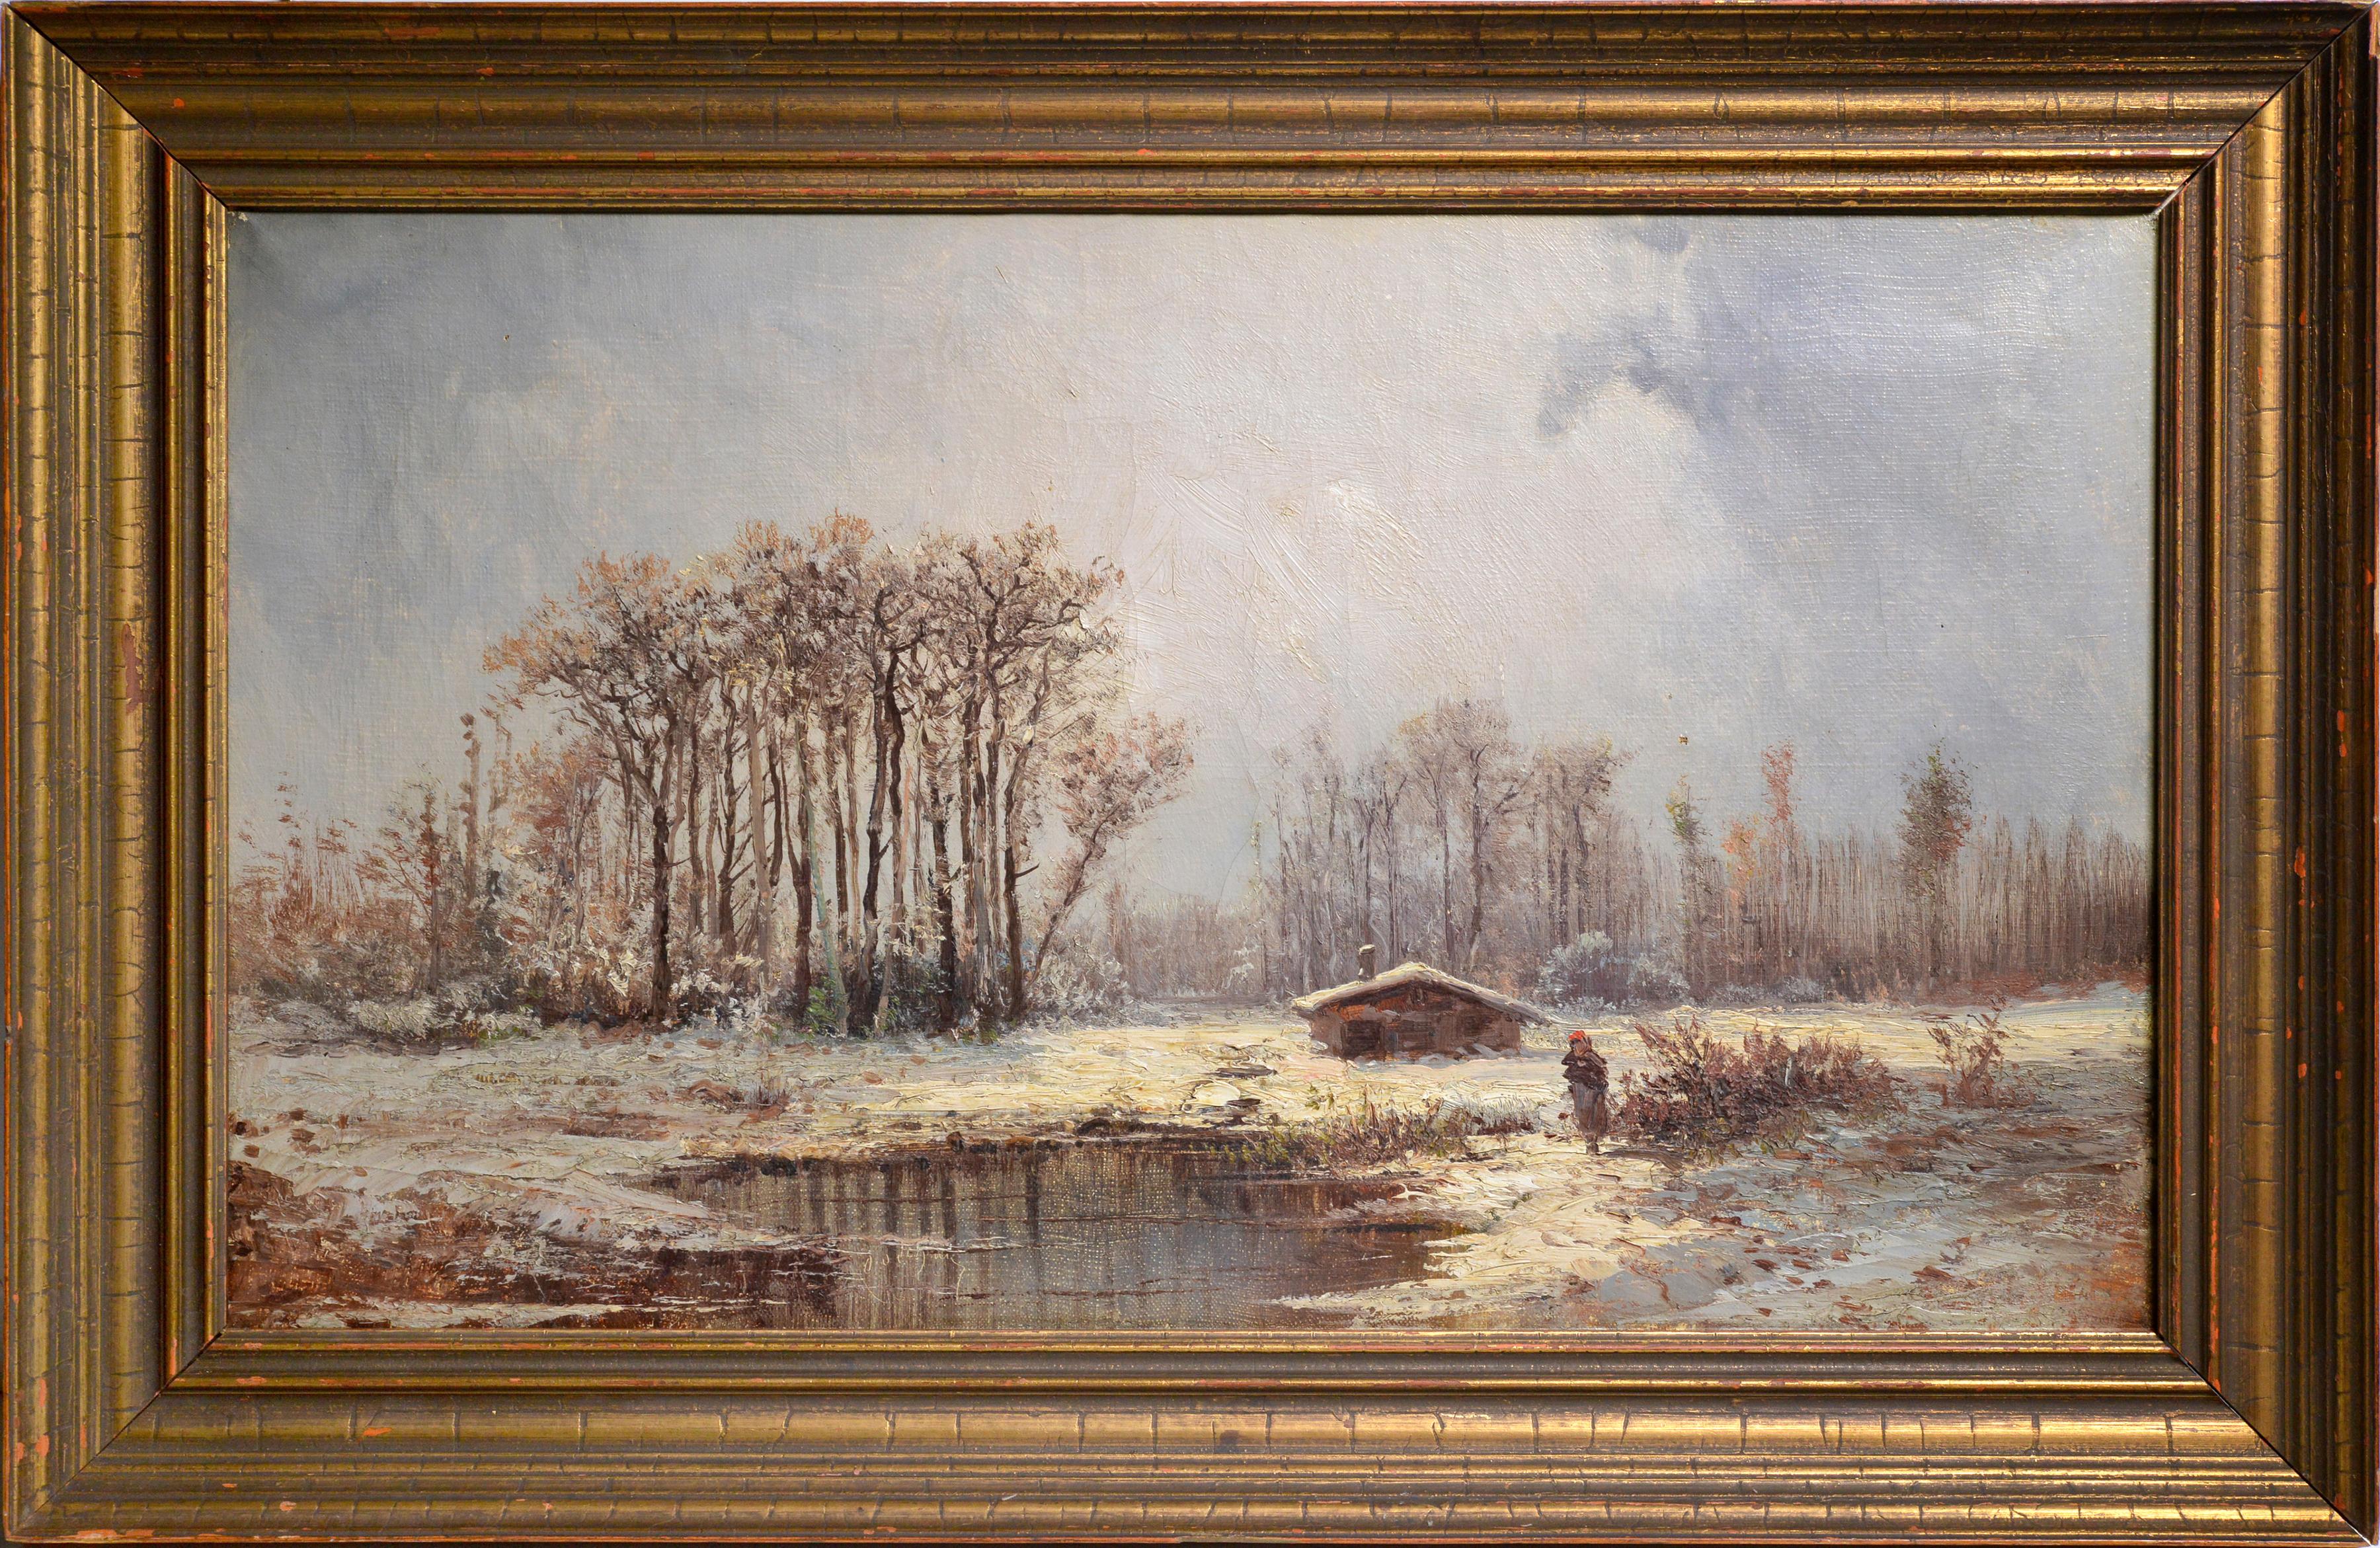 Spring Thaw Barbizon Landscape 19th century Oil painting by French Impressionist